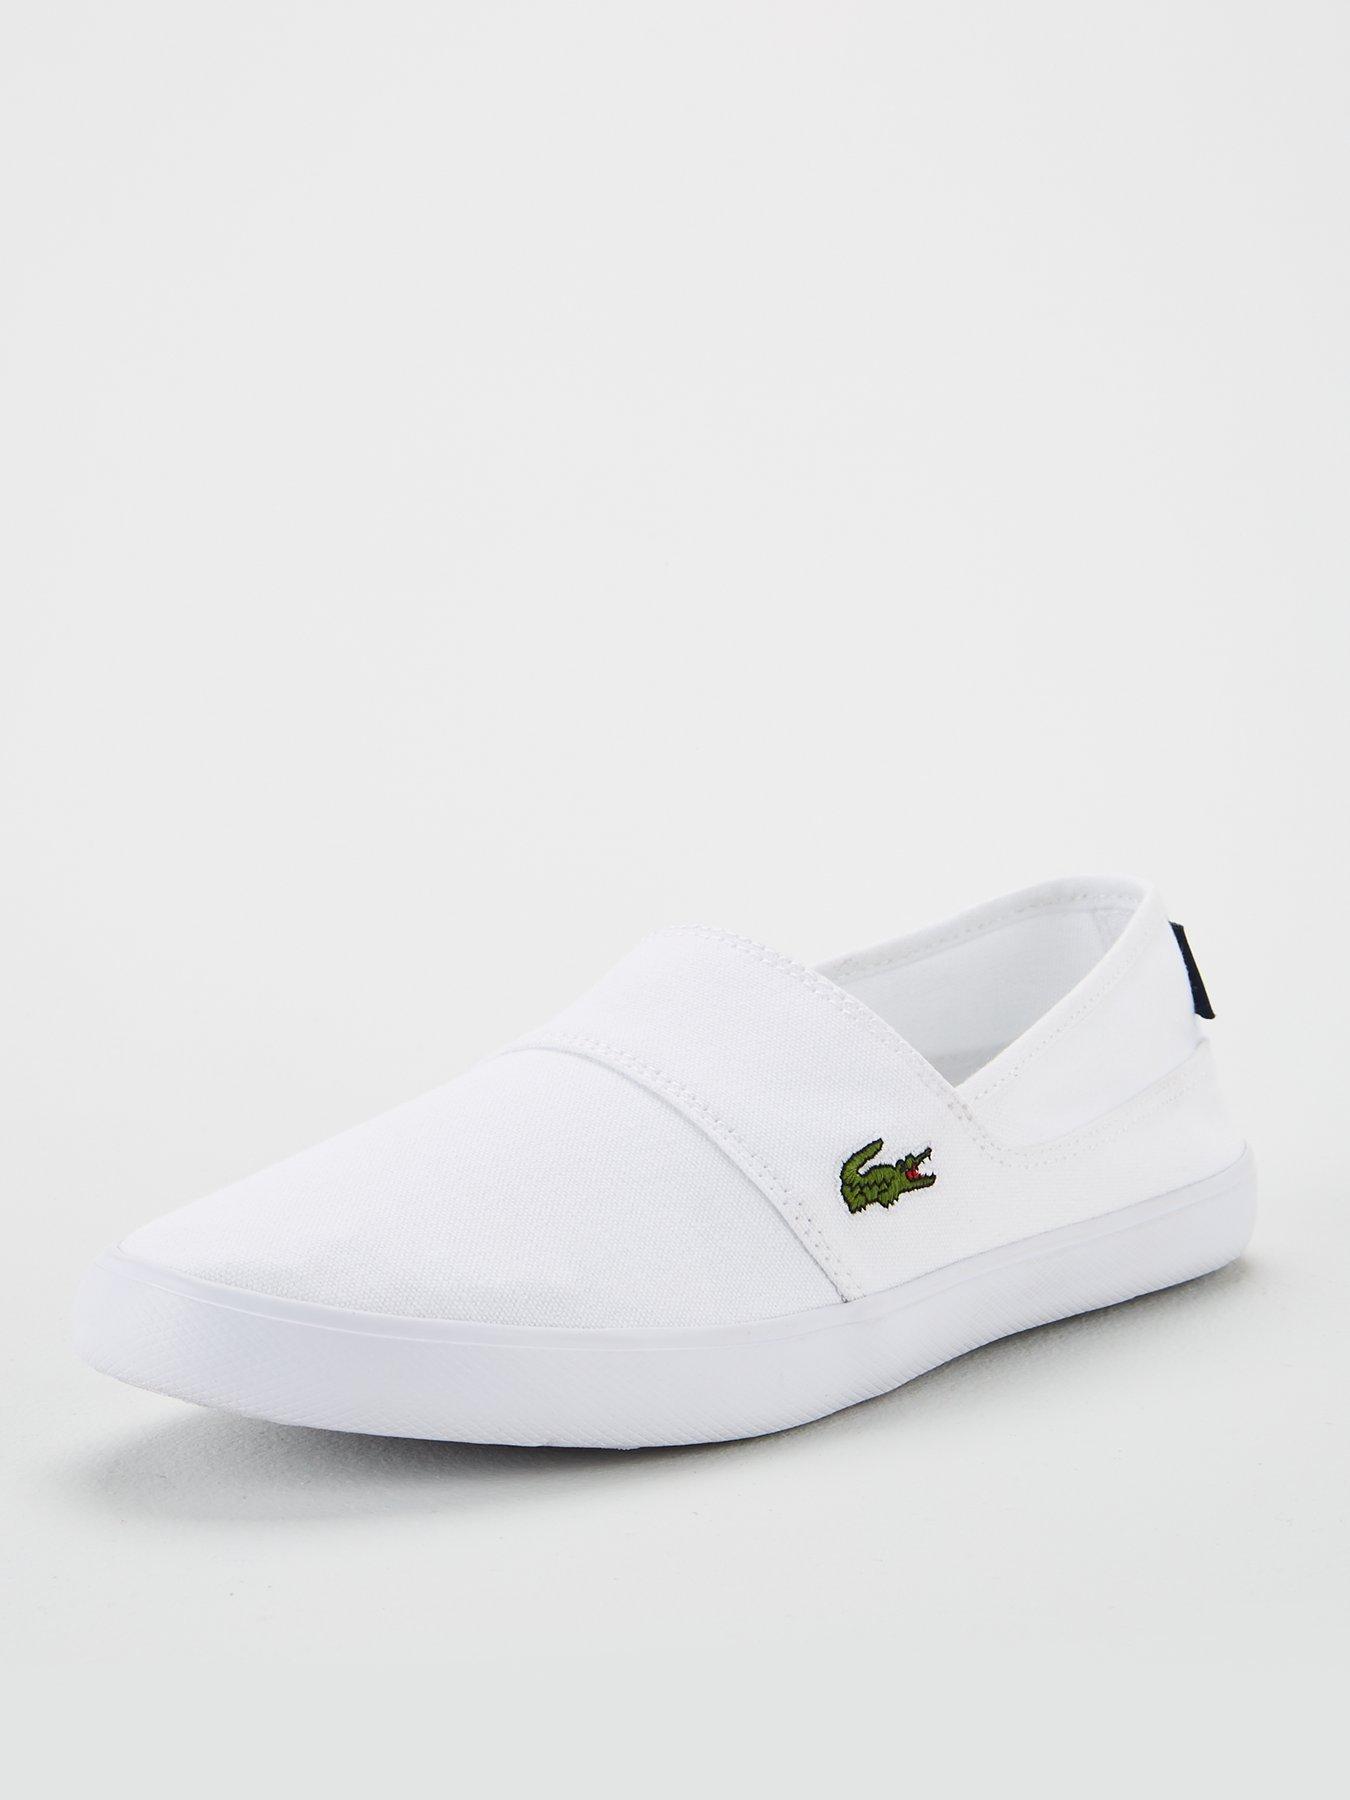 lacoste canvas slip on shoes